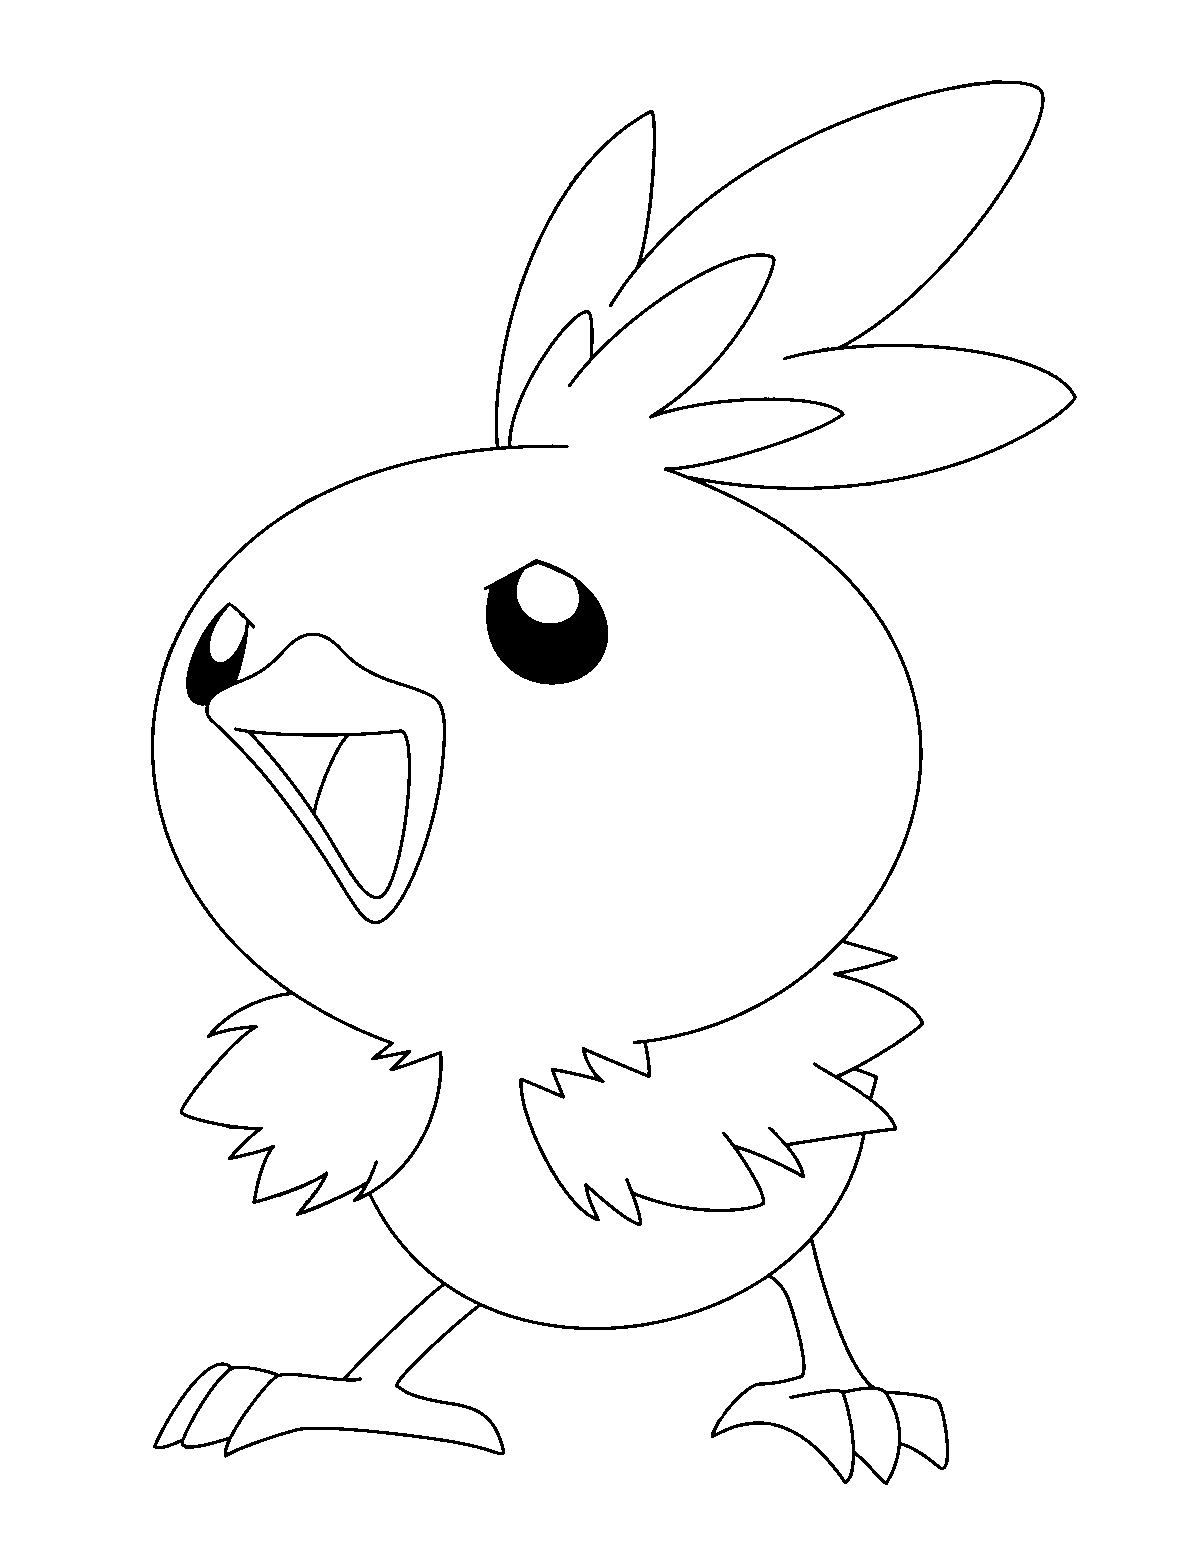 torchic-pokemon-coloring-pages